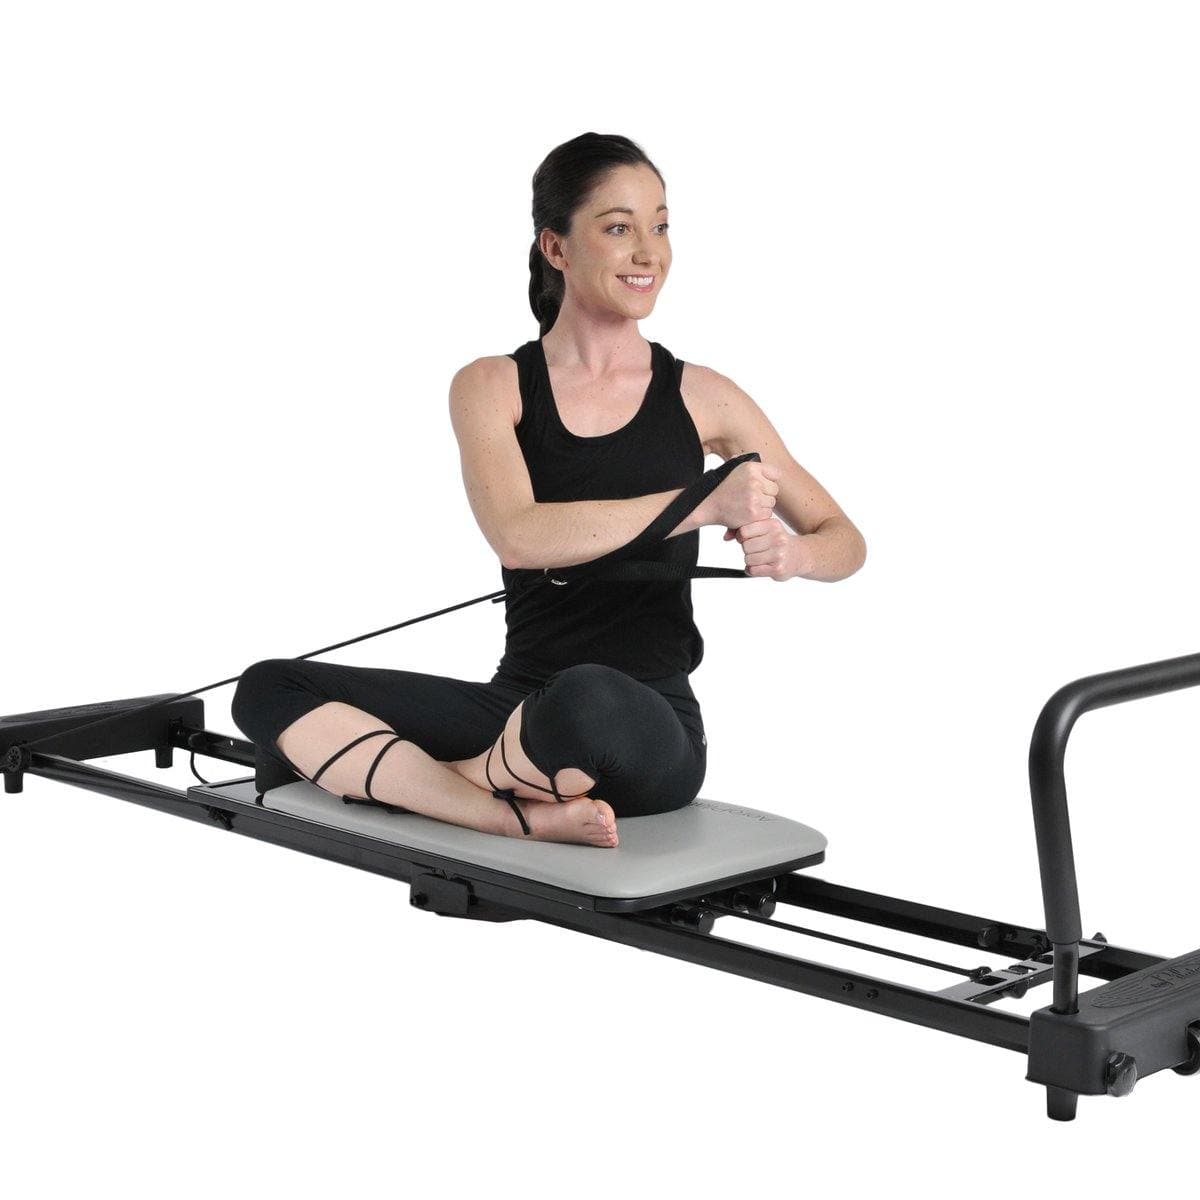 DEMO: Pilates Machine (BOXED)+ FREE Rebounder Attachment And Stand